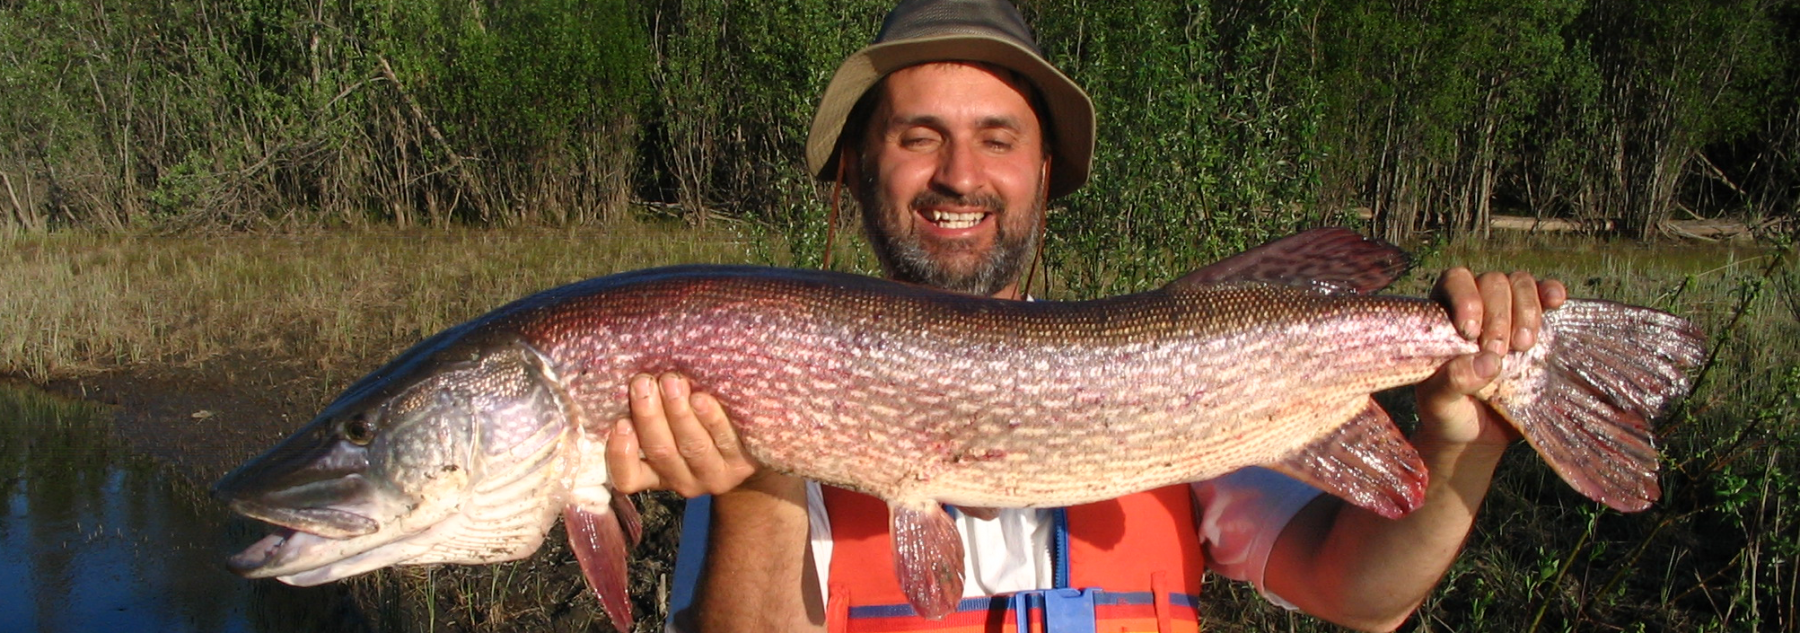 Lawrence holding his catch of a 26lb pike